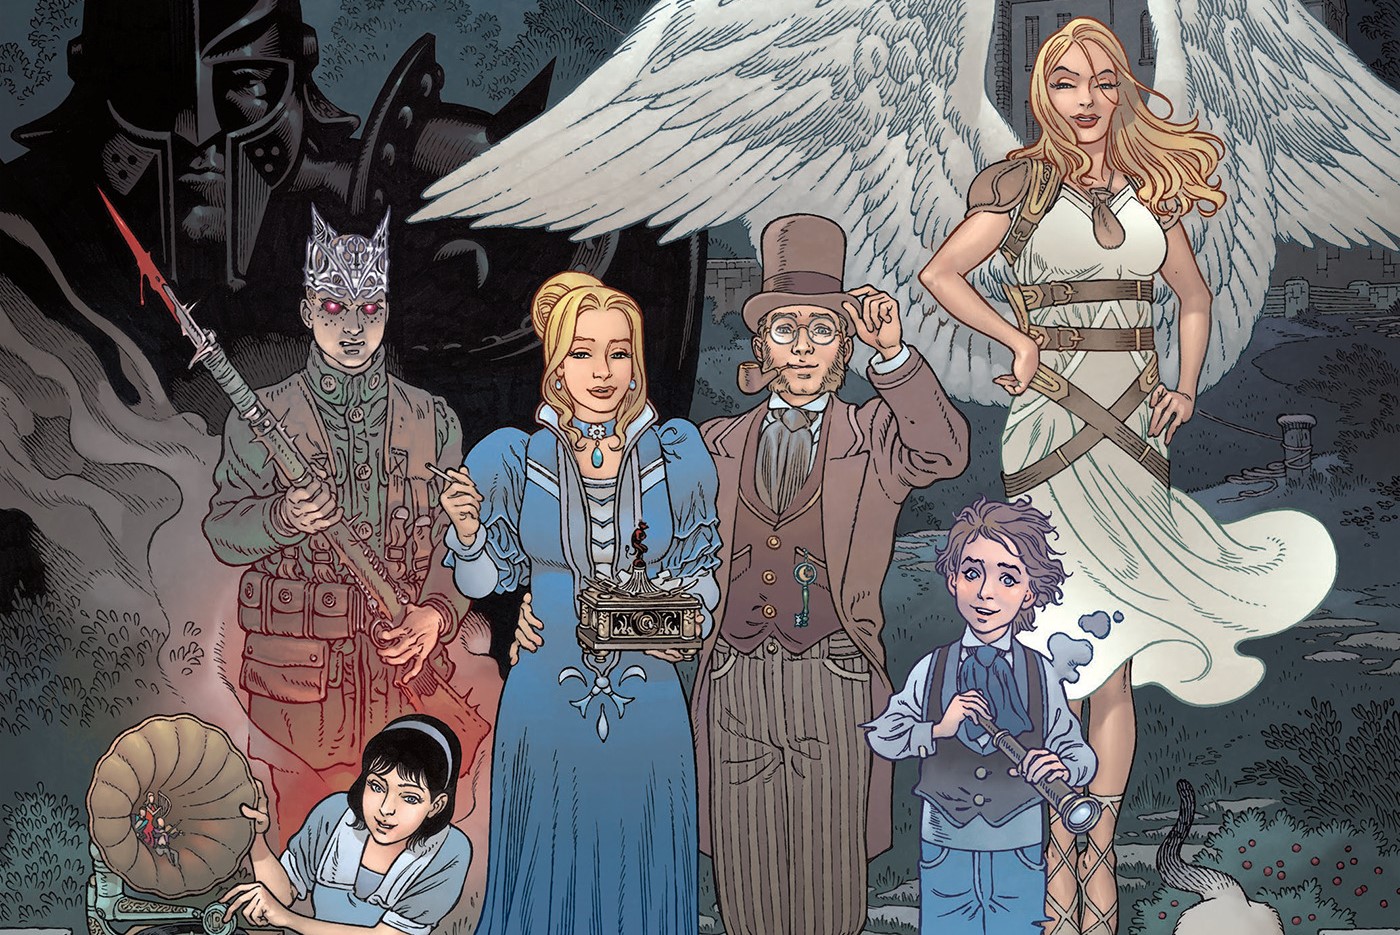 New 'Locke & Key: The Golden Age' Graphic Novel Unlocks the Past - Bloody  Disgusting